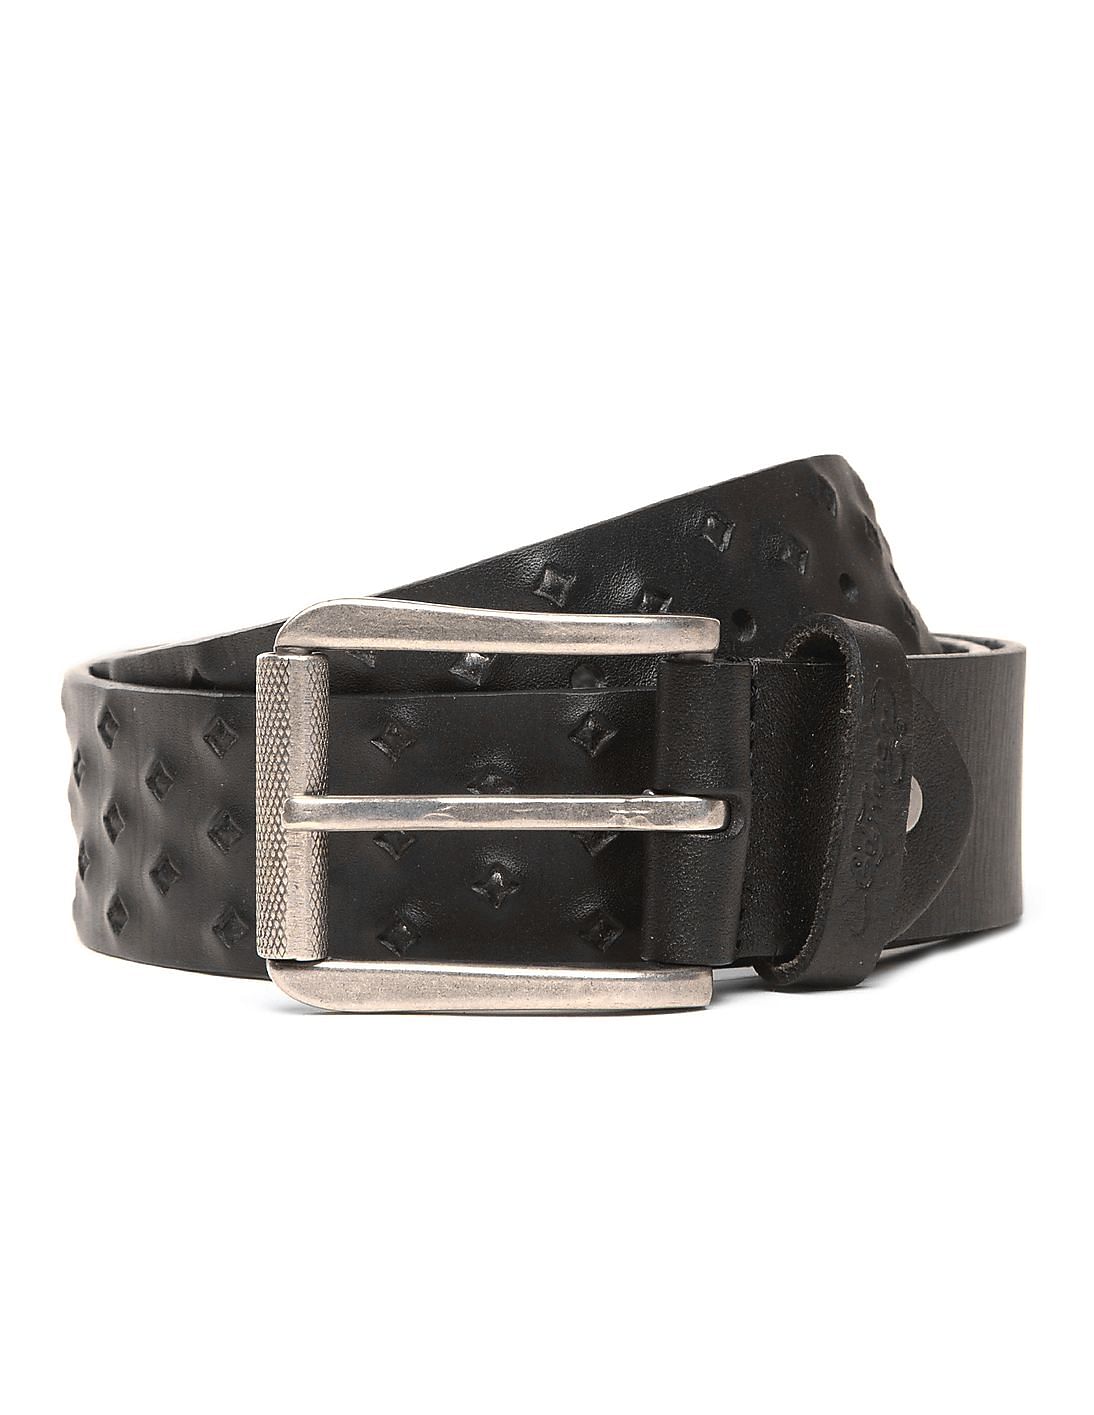 Buy Ed Hardy Patterned Leather Belt - NNNOW.com